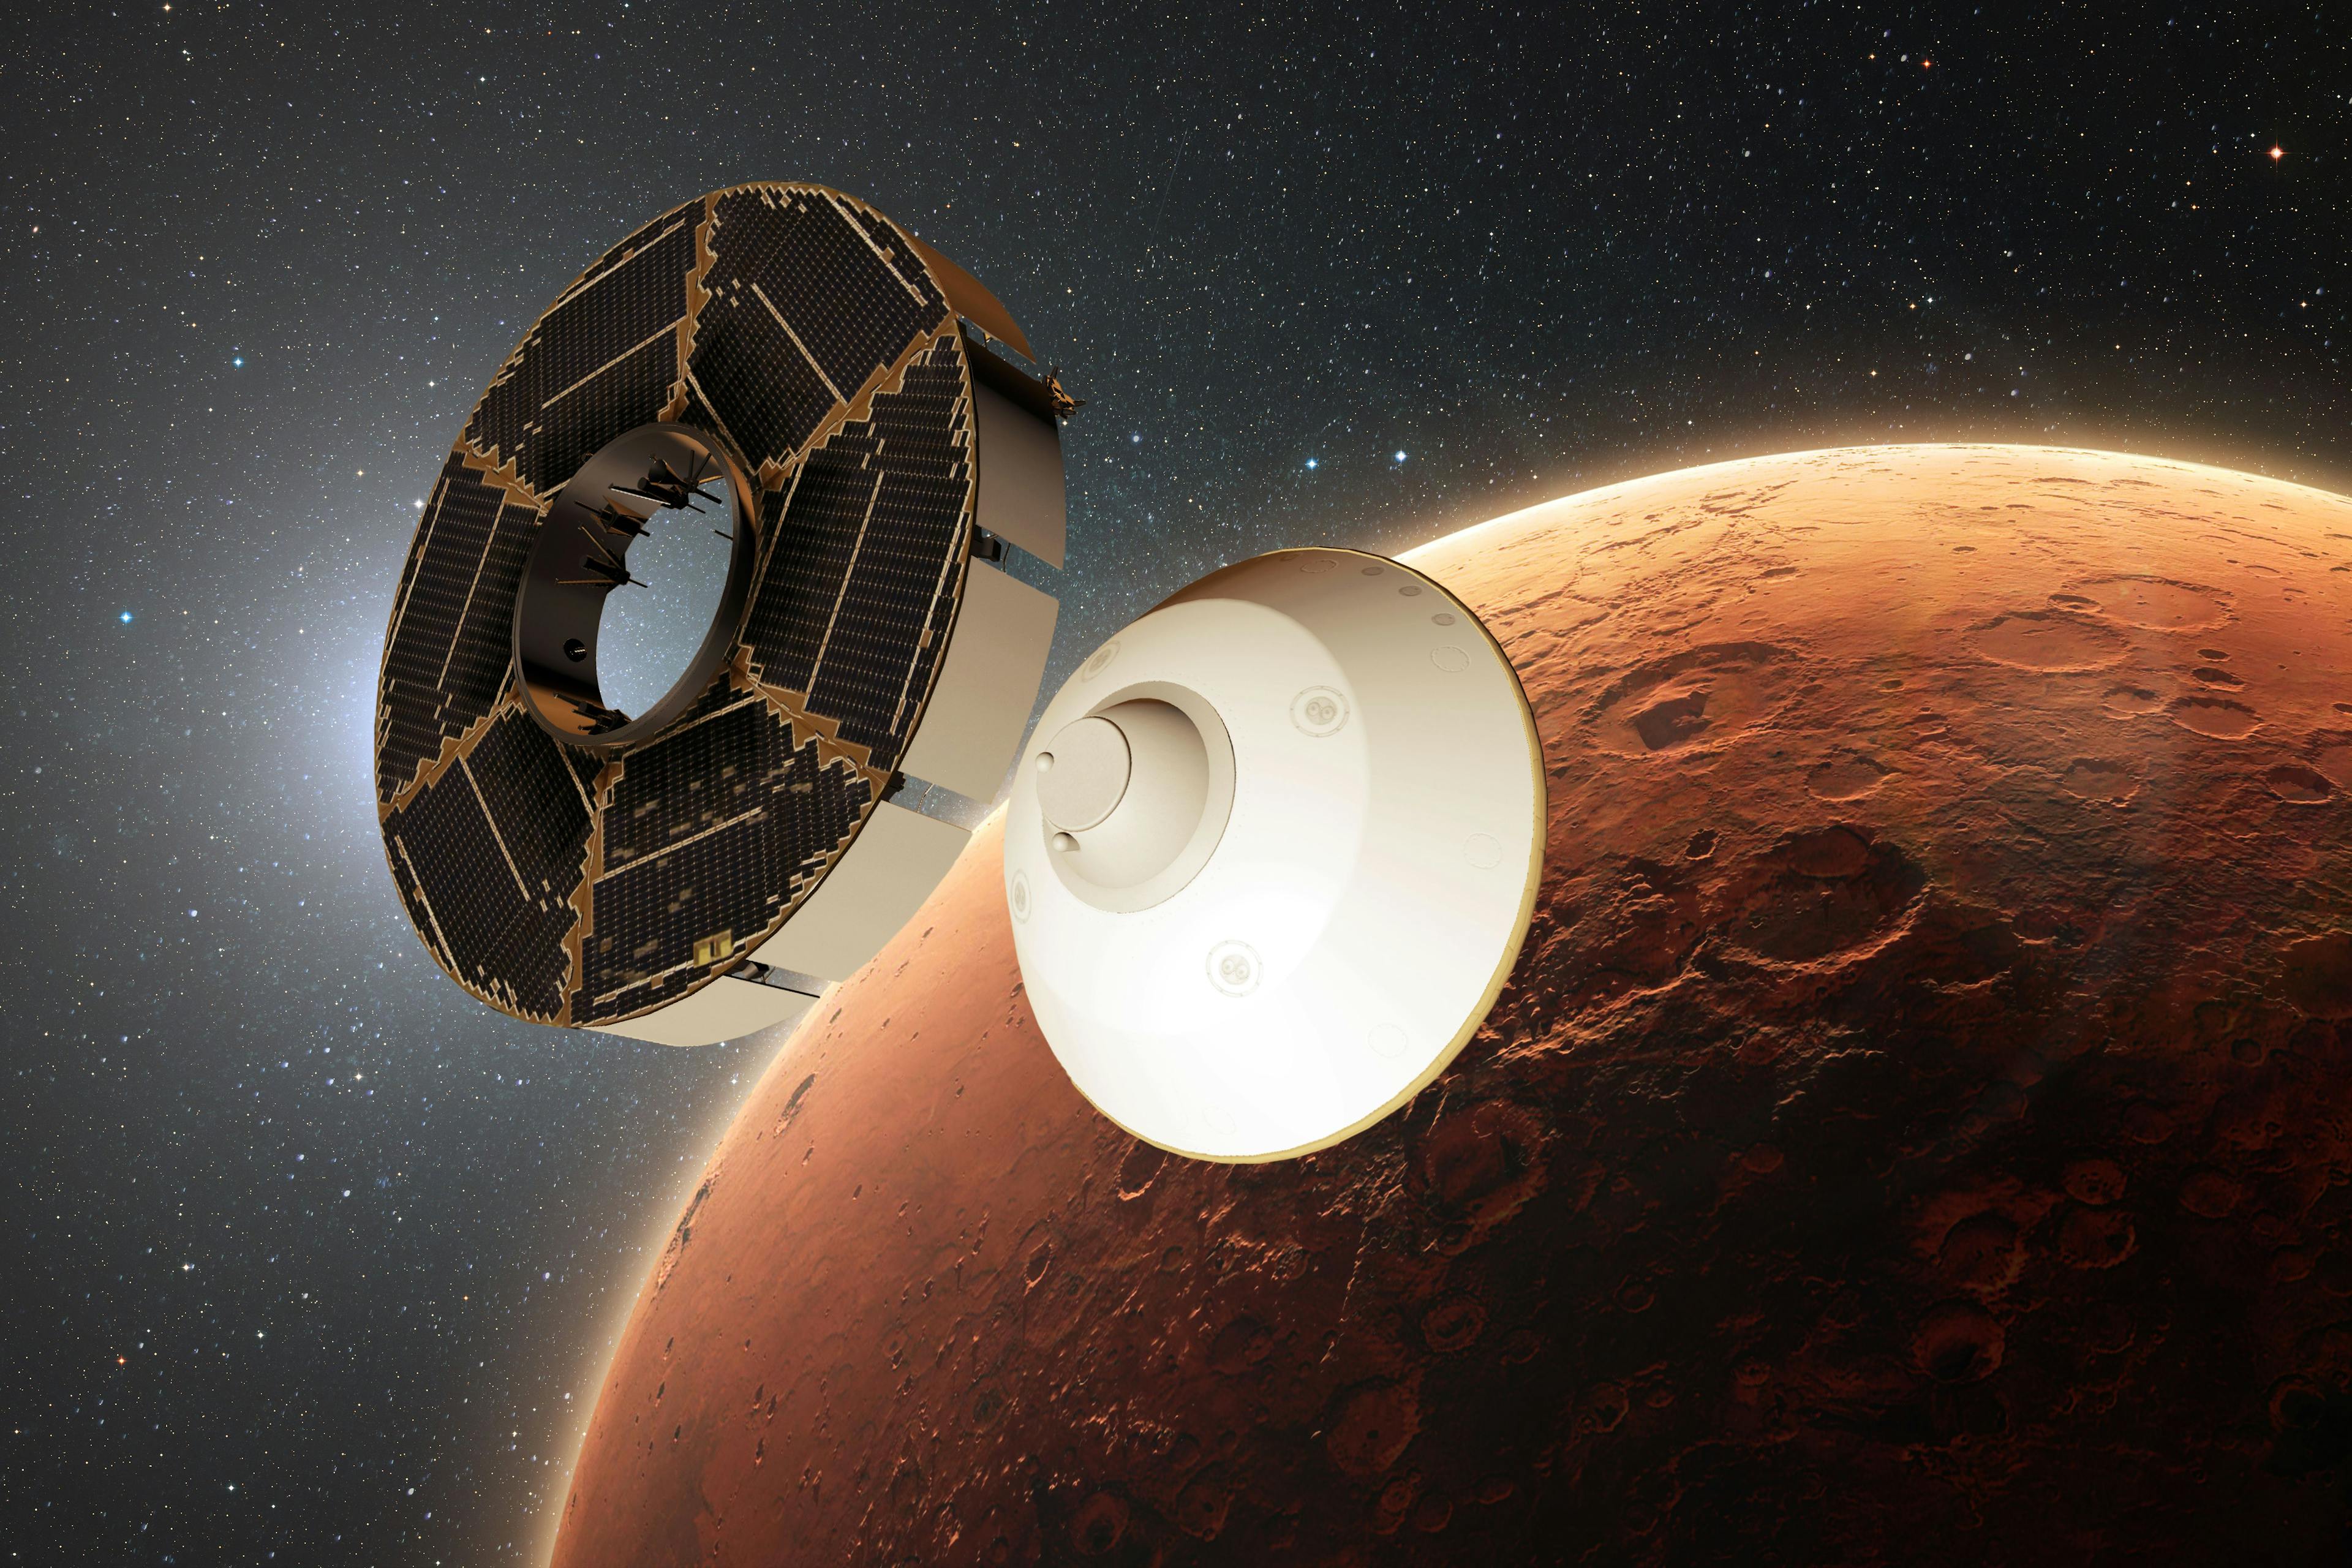 Perseverance Rover's Cruise Stage Separation. Satellite module delivers cargo to the red planet Mars | Image Credit: © alones - stock.adobe.com